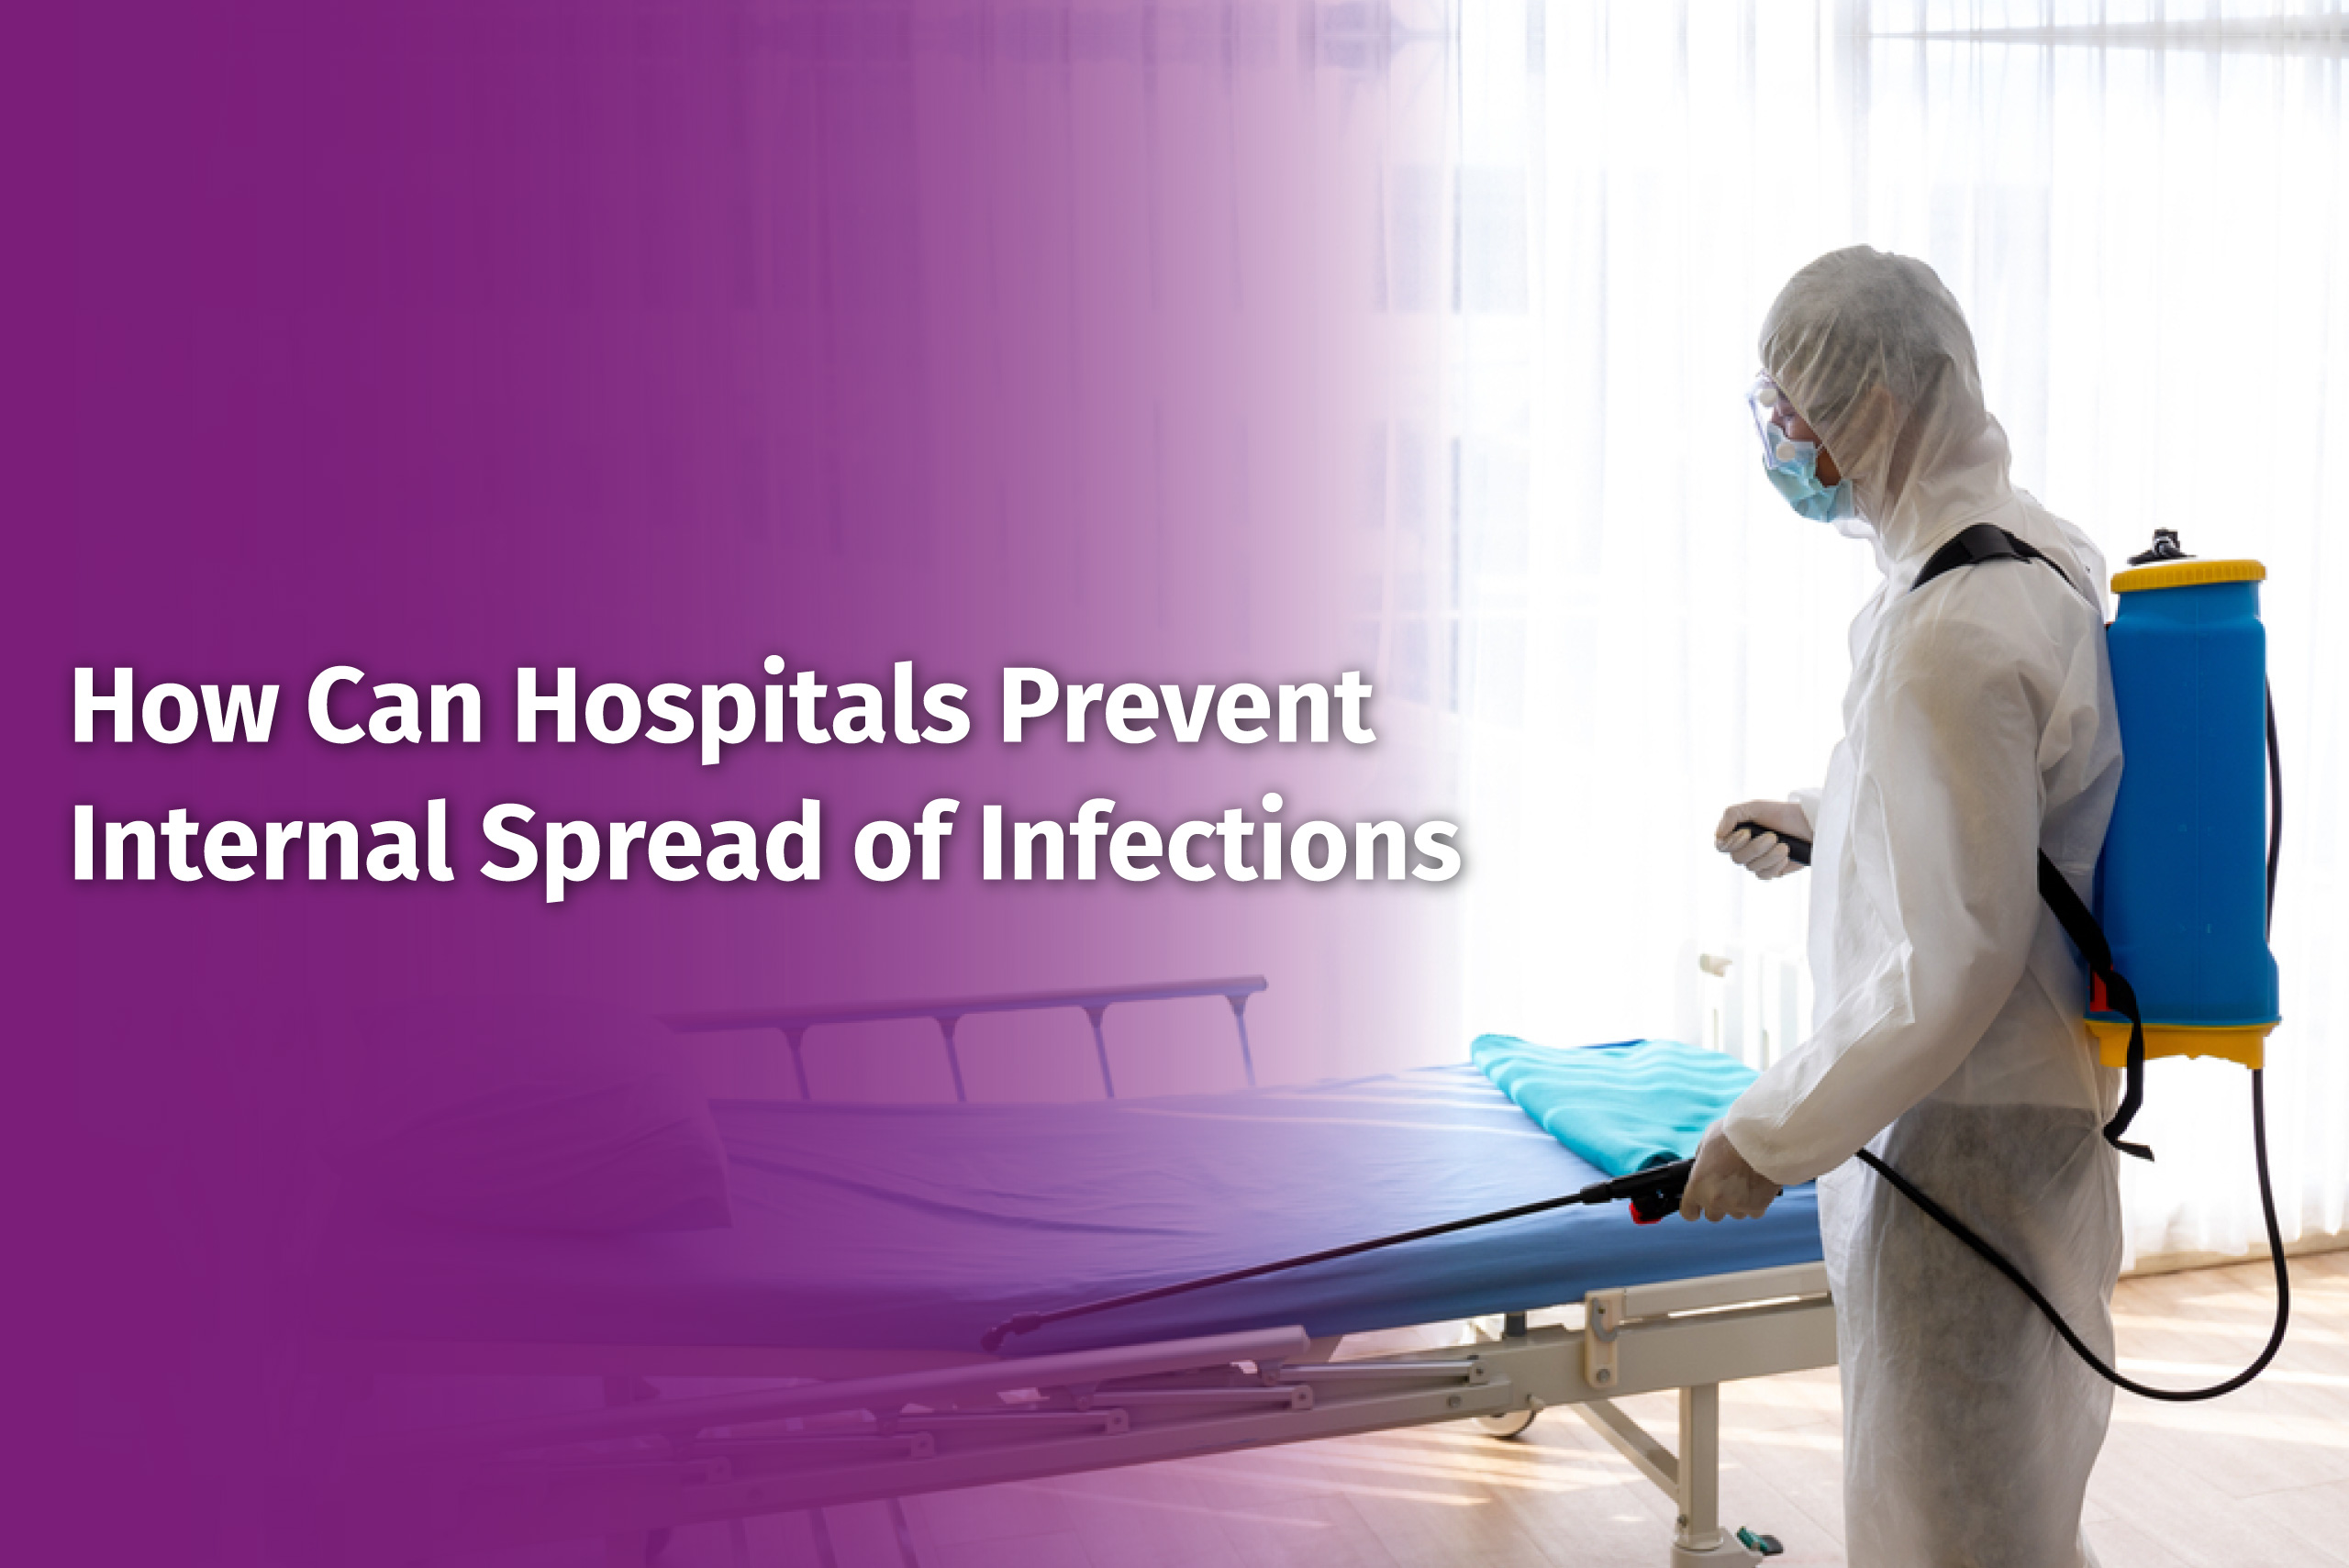 How-Can-Hospitals-Prevent-Internal-Spread-of-Infections